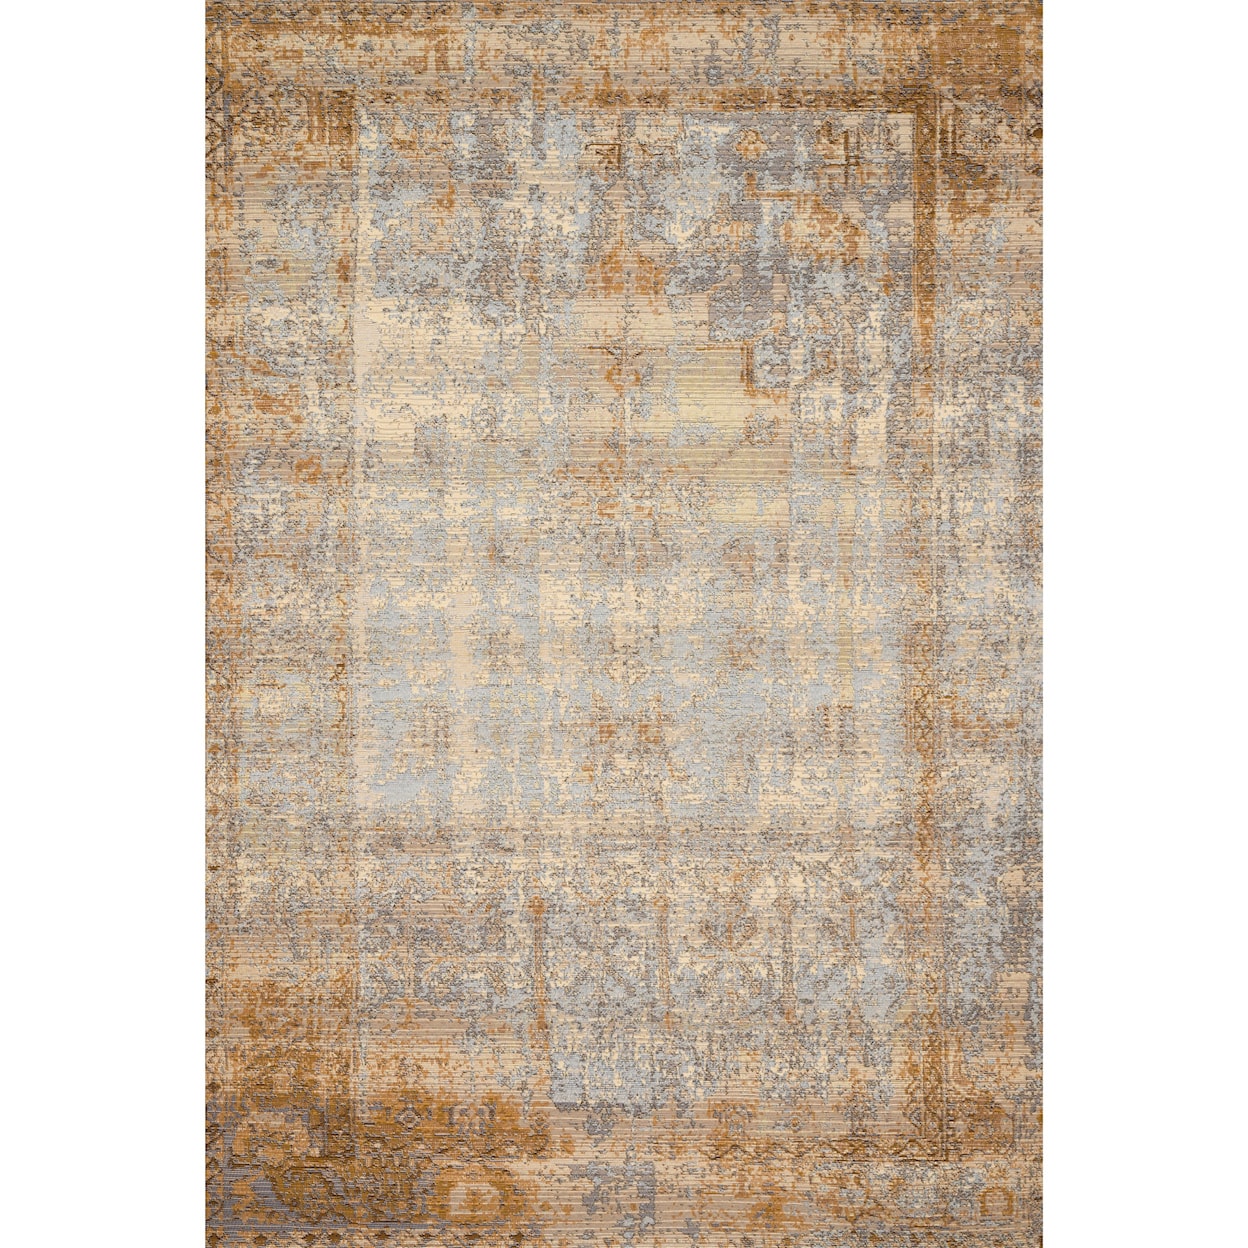 Reeds Rugs Mika 3'11" x 5'11" Ant. Ivory / Copper Rug